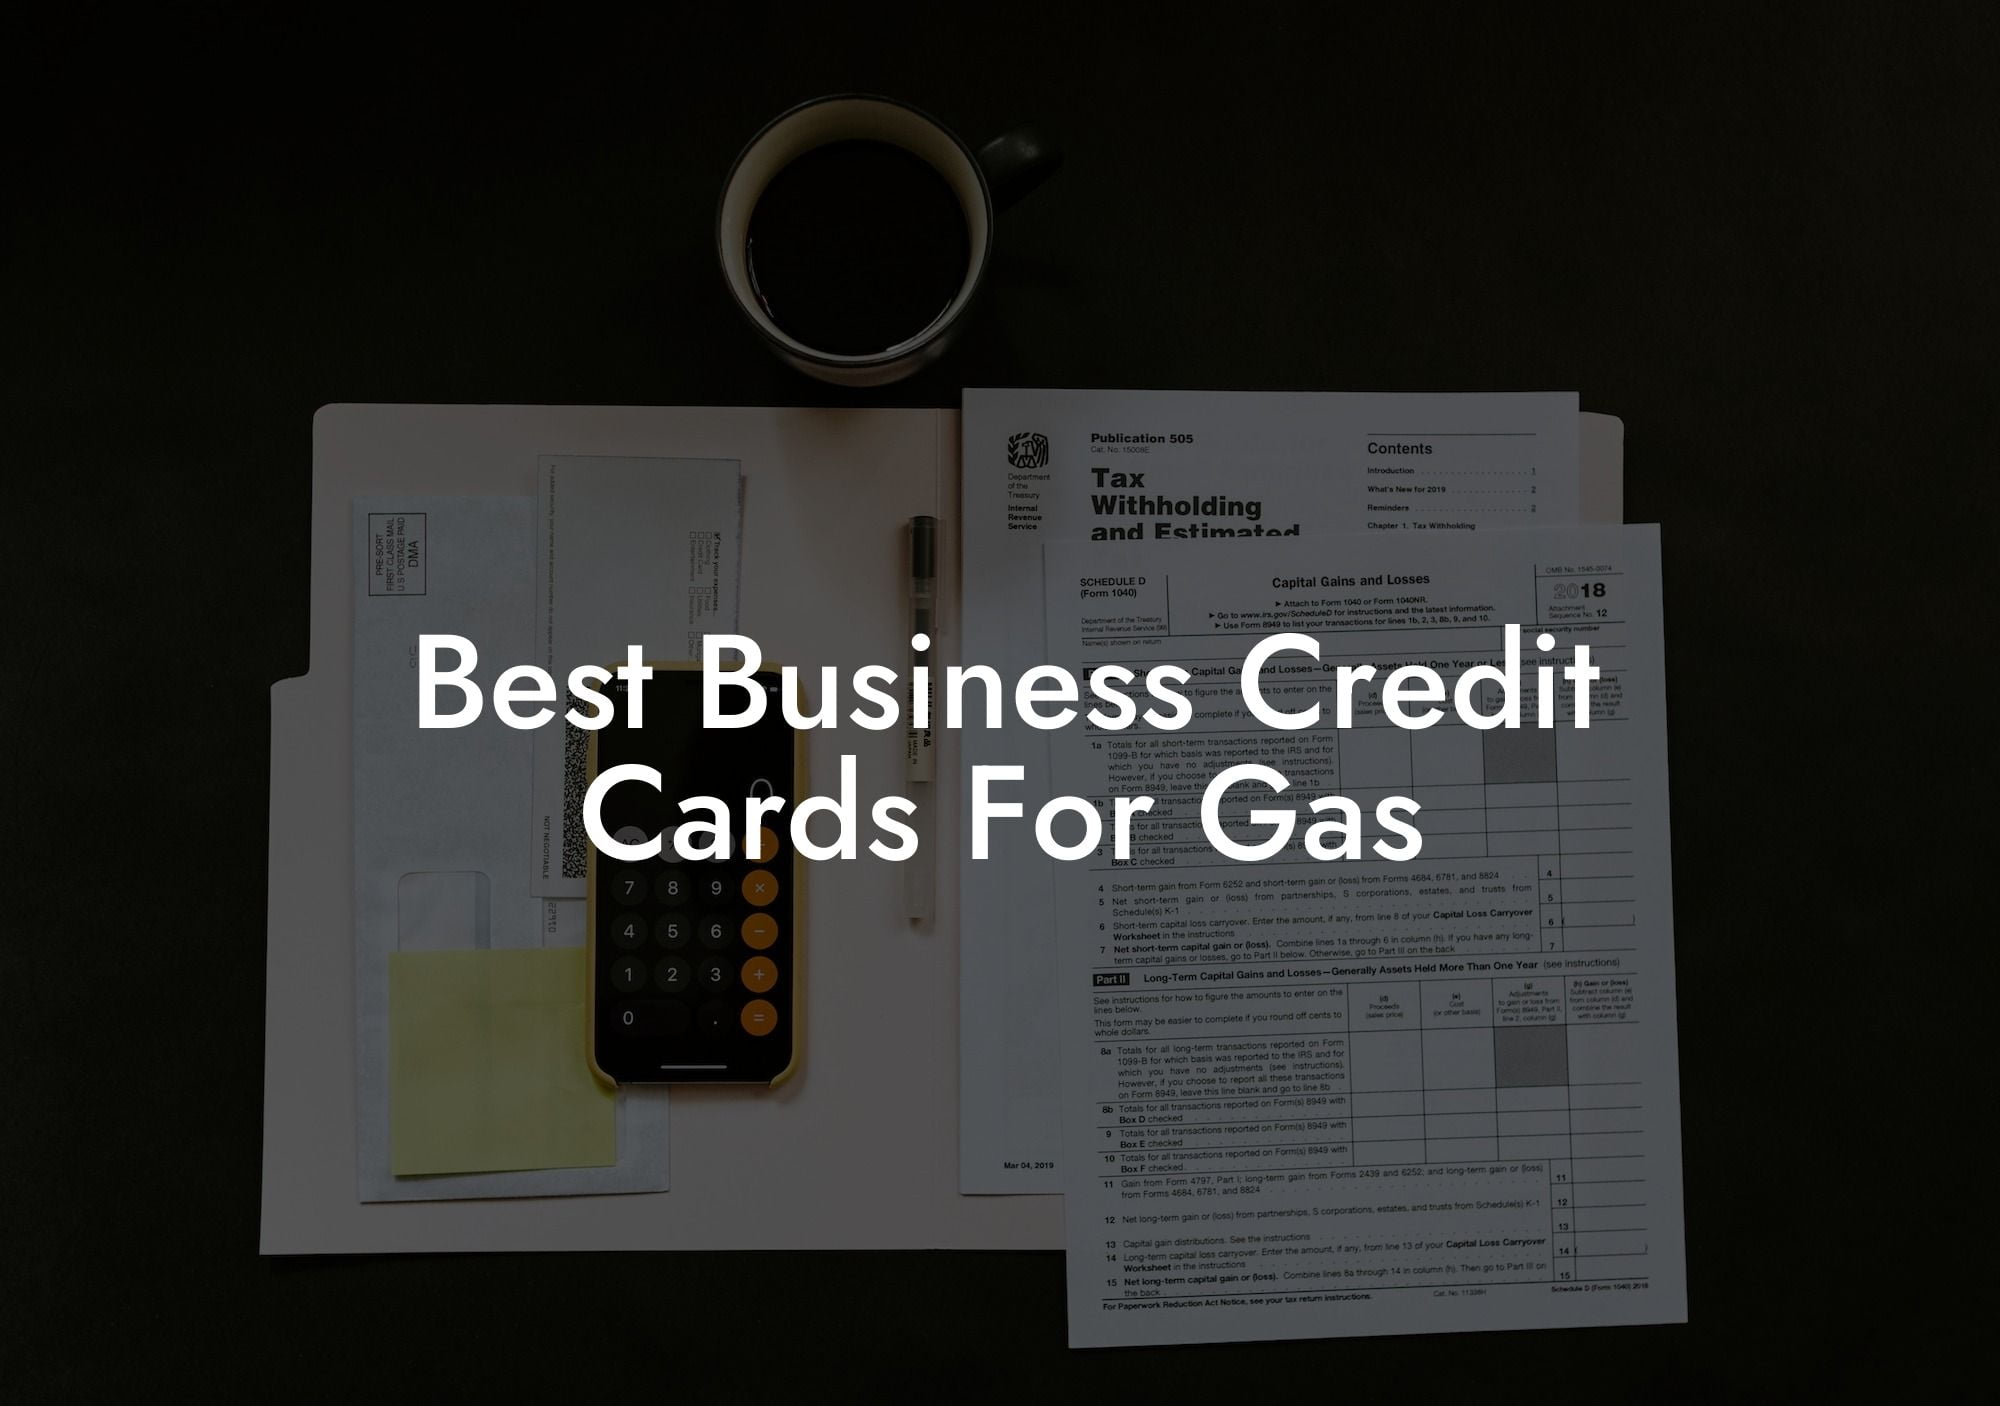 Best Business Credit Cards For Gas